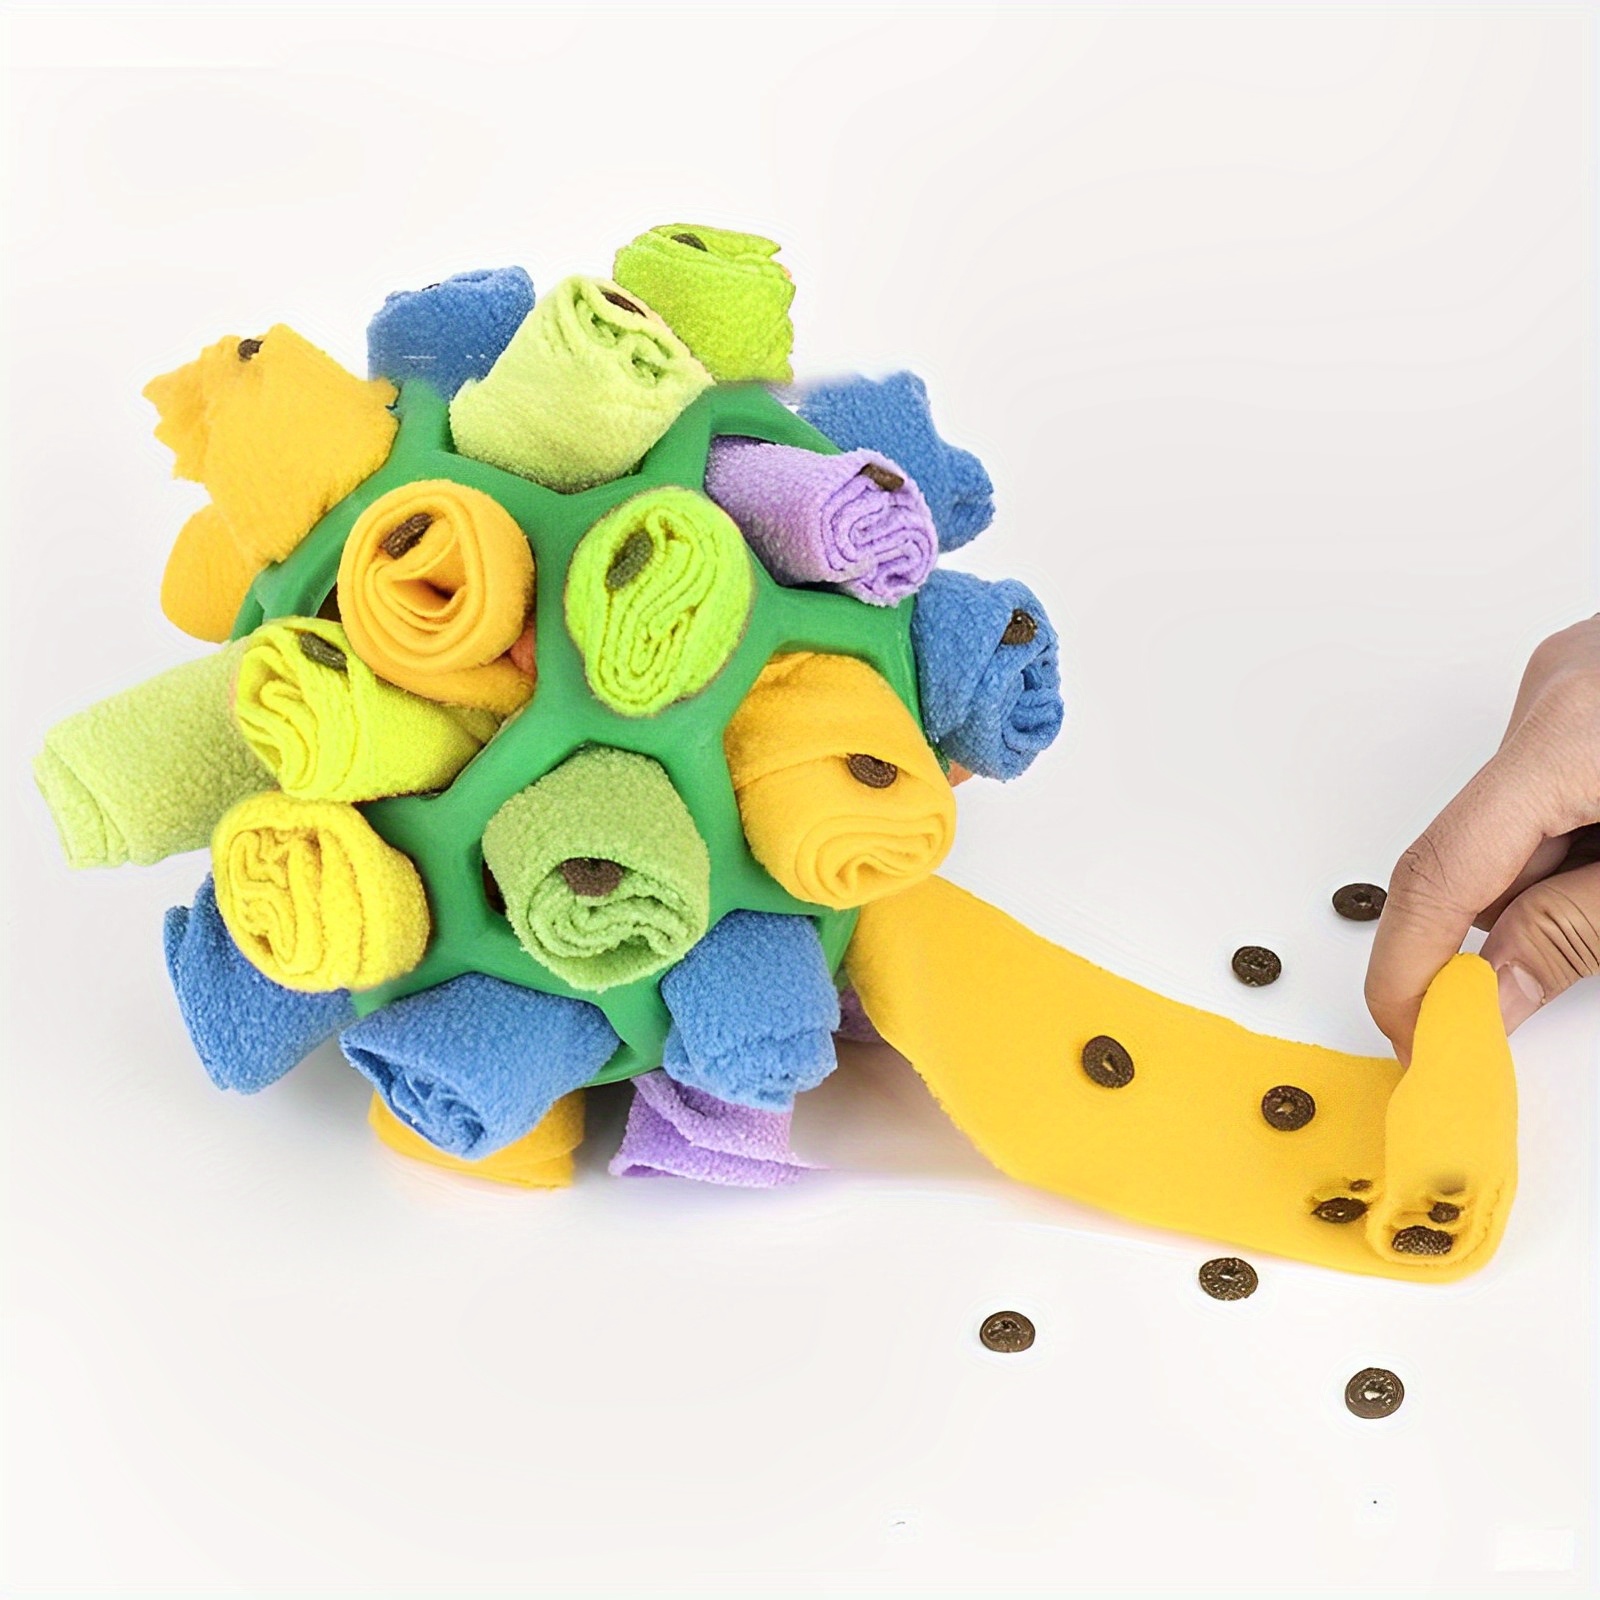 Dog Toys, Snuffle Ball Training, Interactive Dog Toy for Feeding, Dog  Puzzle Enrichment Toys to Medium Size Dogs - AliExpress